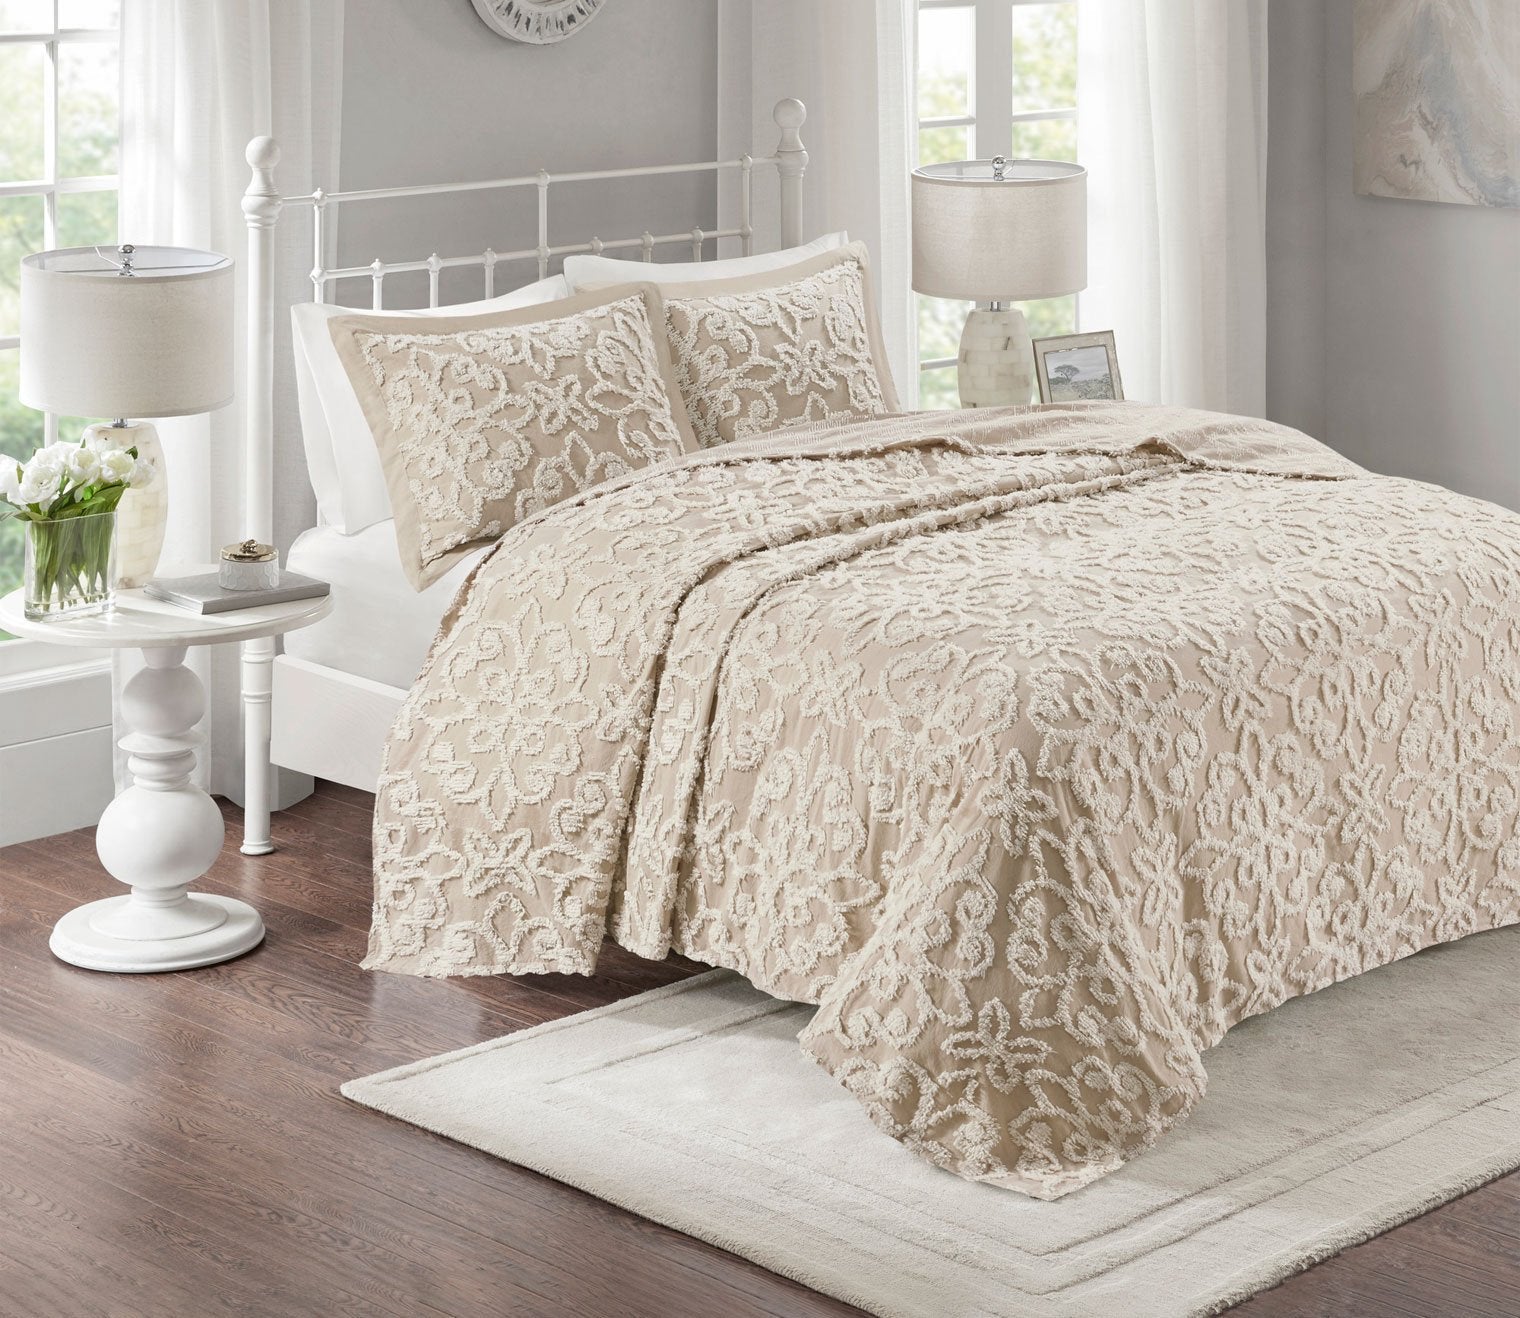 Sabrina Tufted Cotton Chenille 3-Piece Bedspread Set by Madison Park